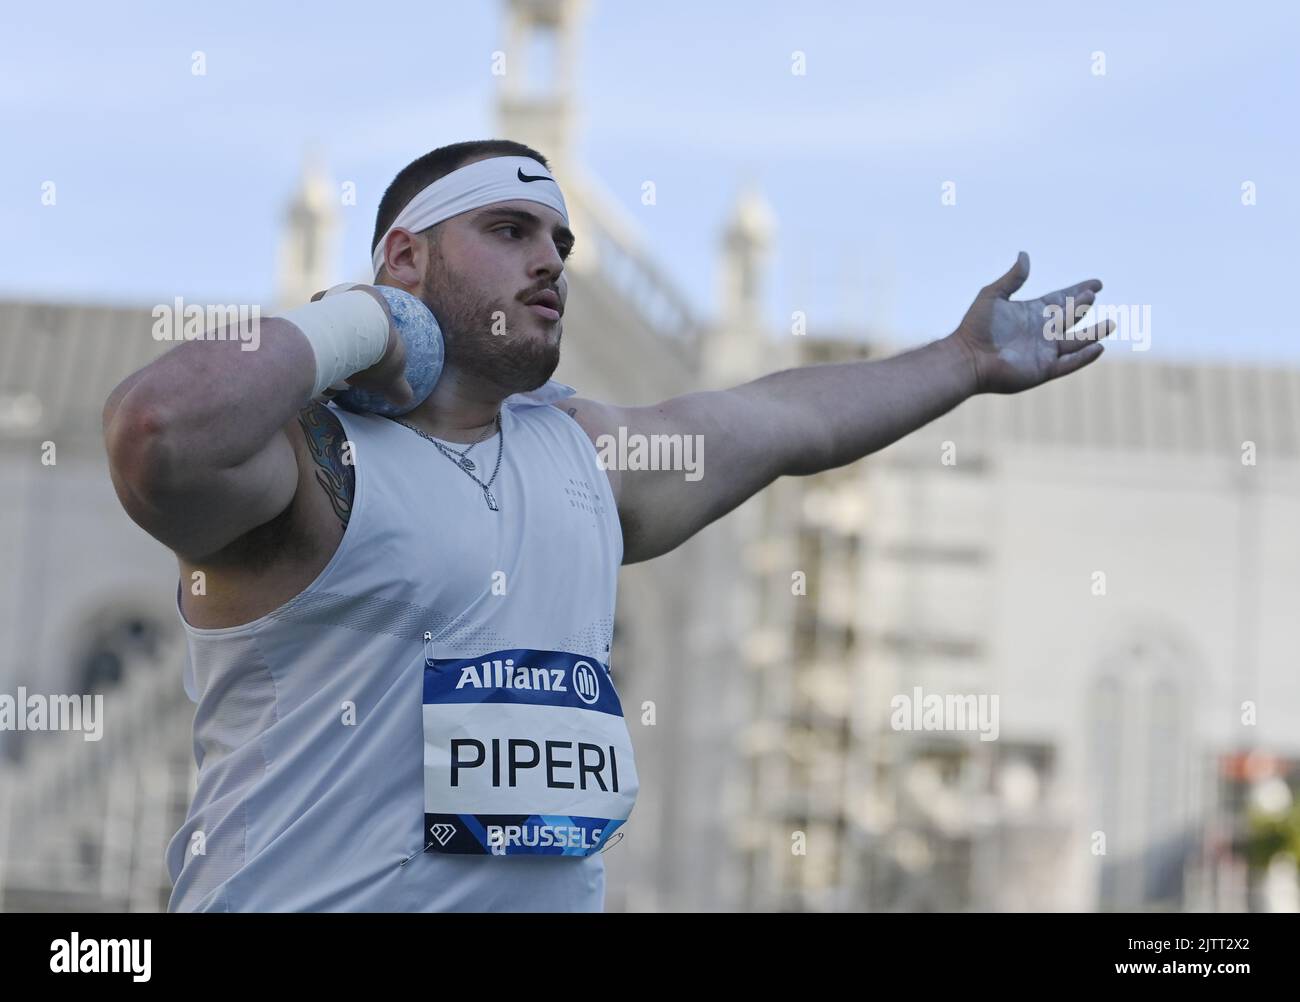 US' Adrian Piperi pictured in action during the shot put competition on the eve of the Memorial Van Damme Diamond League meeting athletics event, in Brussels, Thursday 01 September 2022. The Diamond League meeting takes place on 02 September. BELGA PHOTO ERIC LALMAND Stock Photo